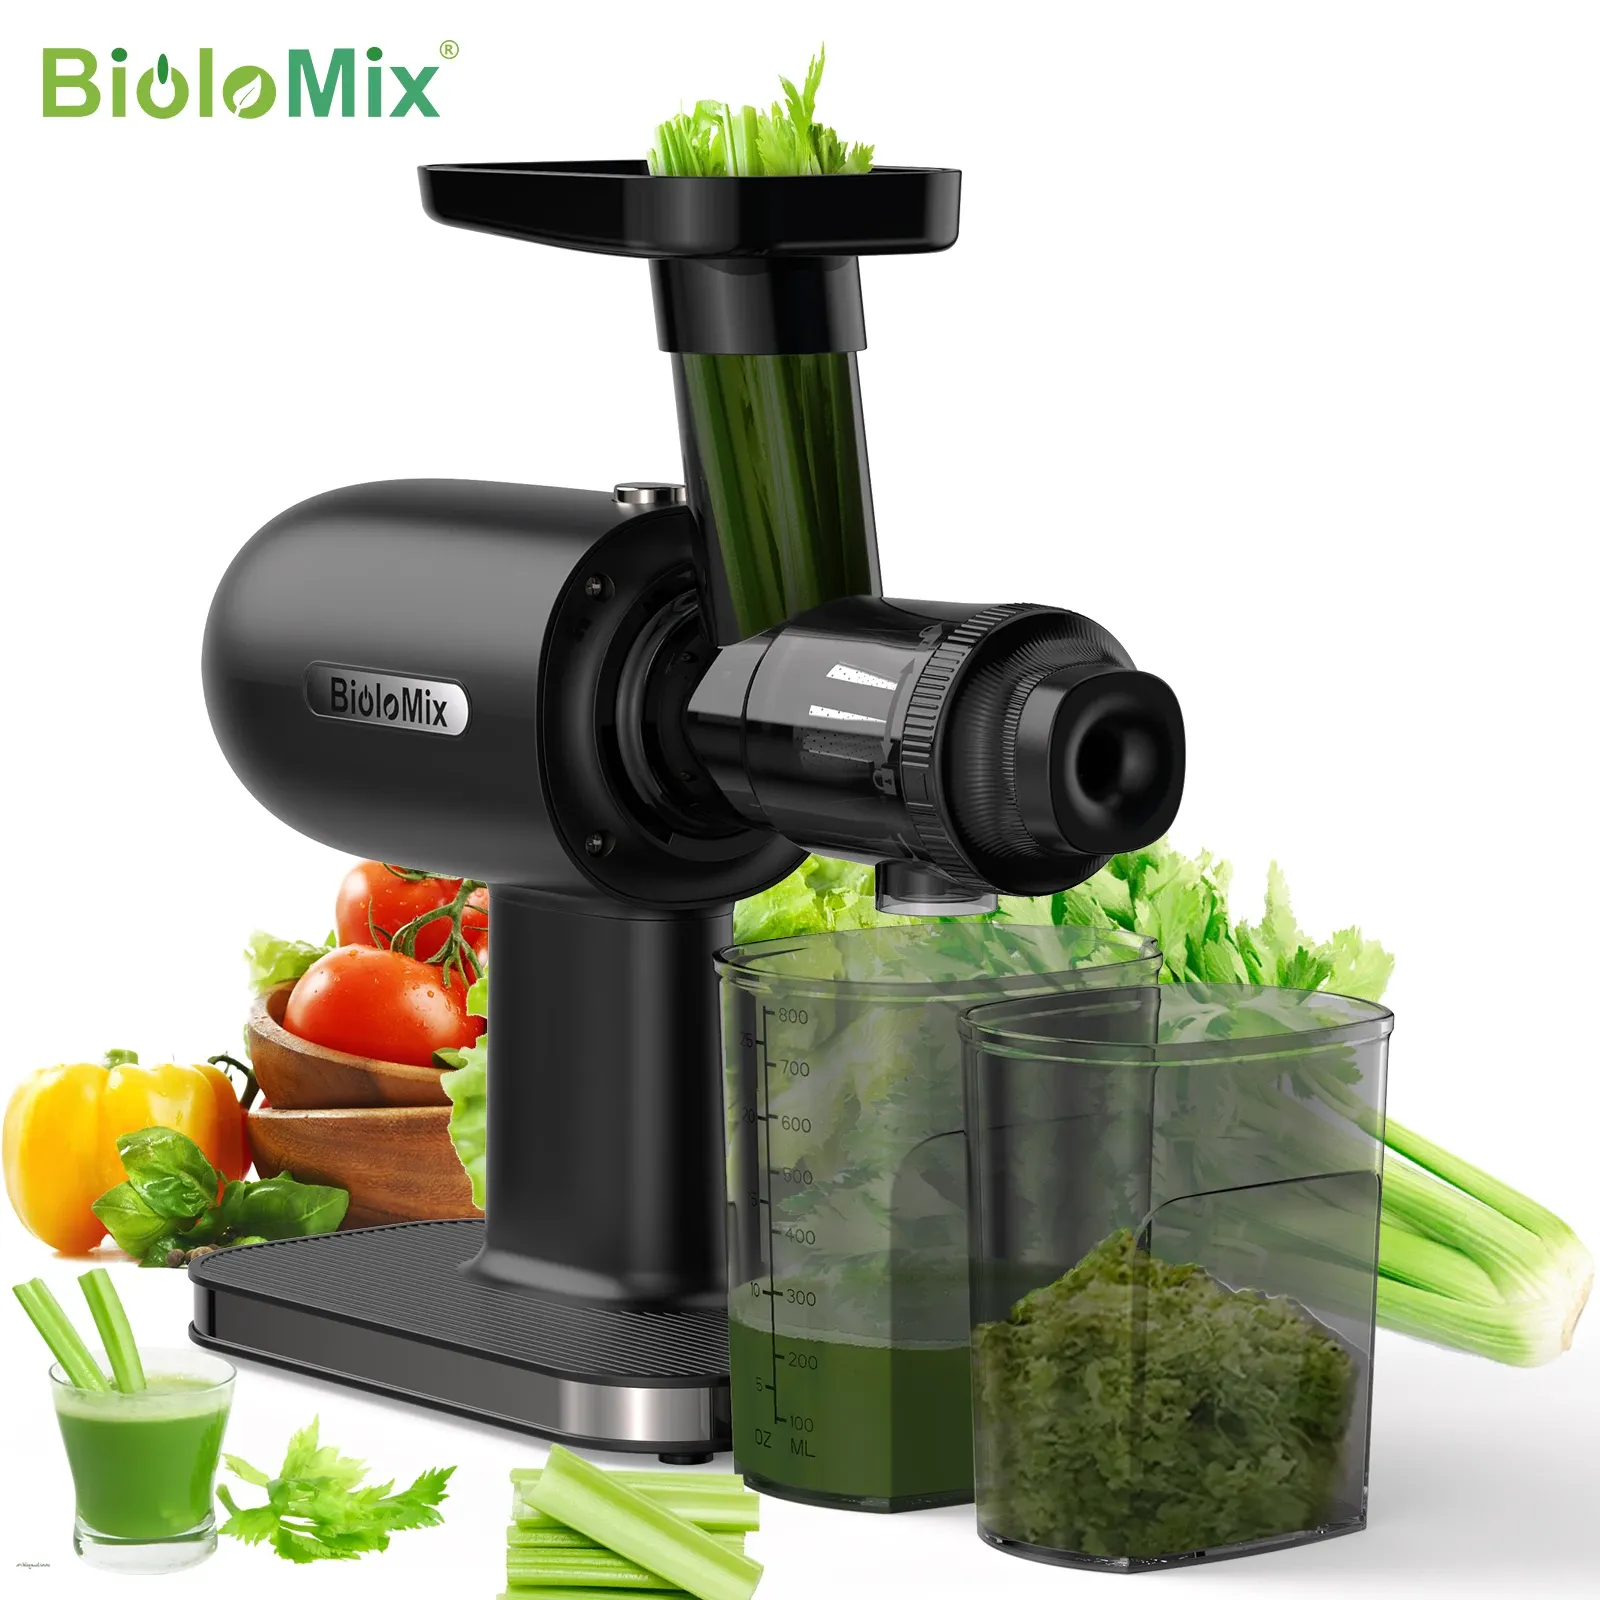 Juicers BioloMix Cold Press Juicer,Slow Masticating Juicer Machines with Reverse Function,High Juice Yield, Easy to Clean Brush & Quiet